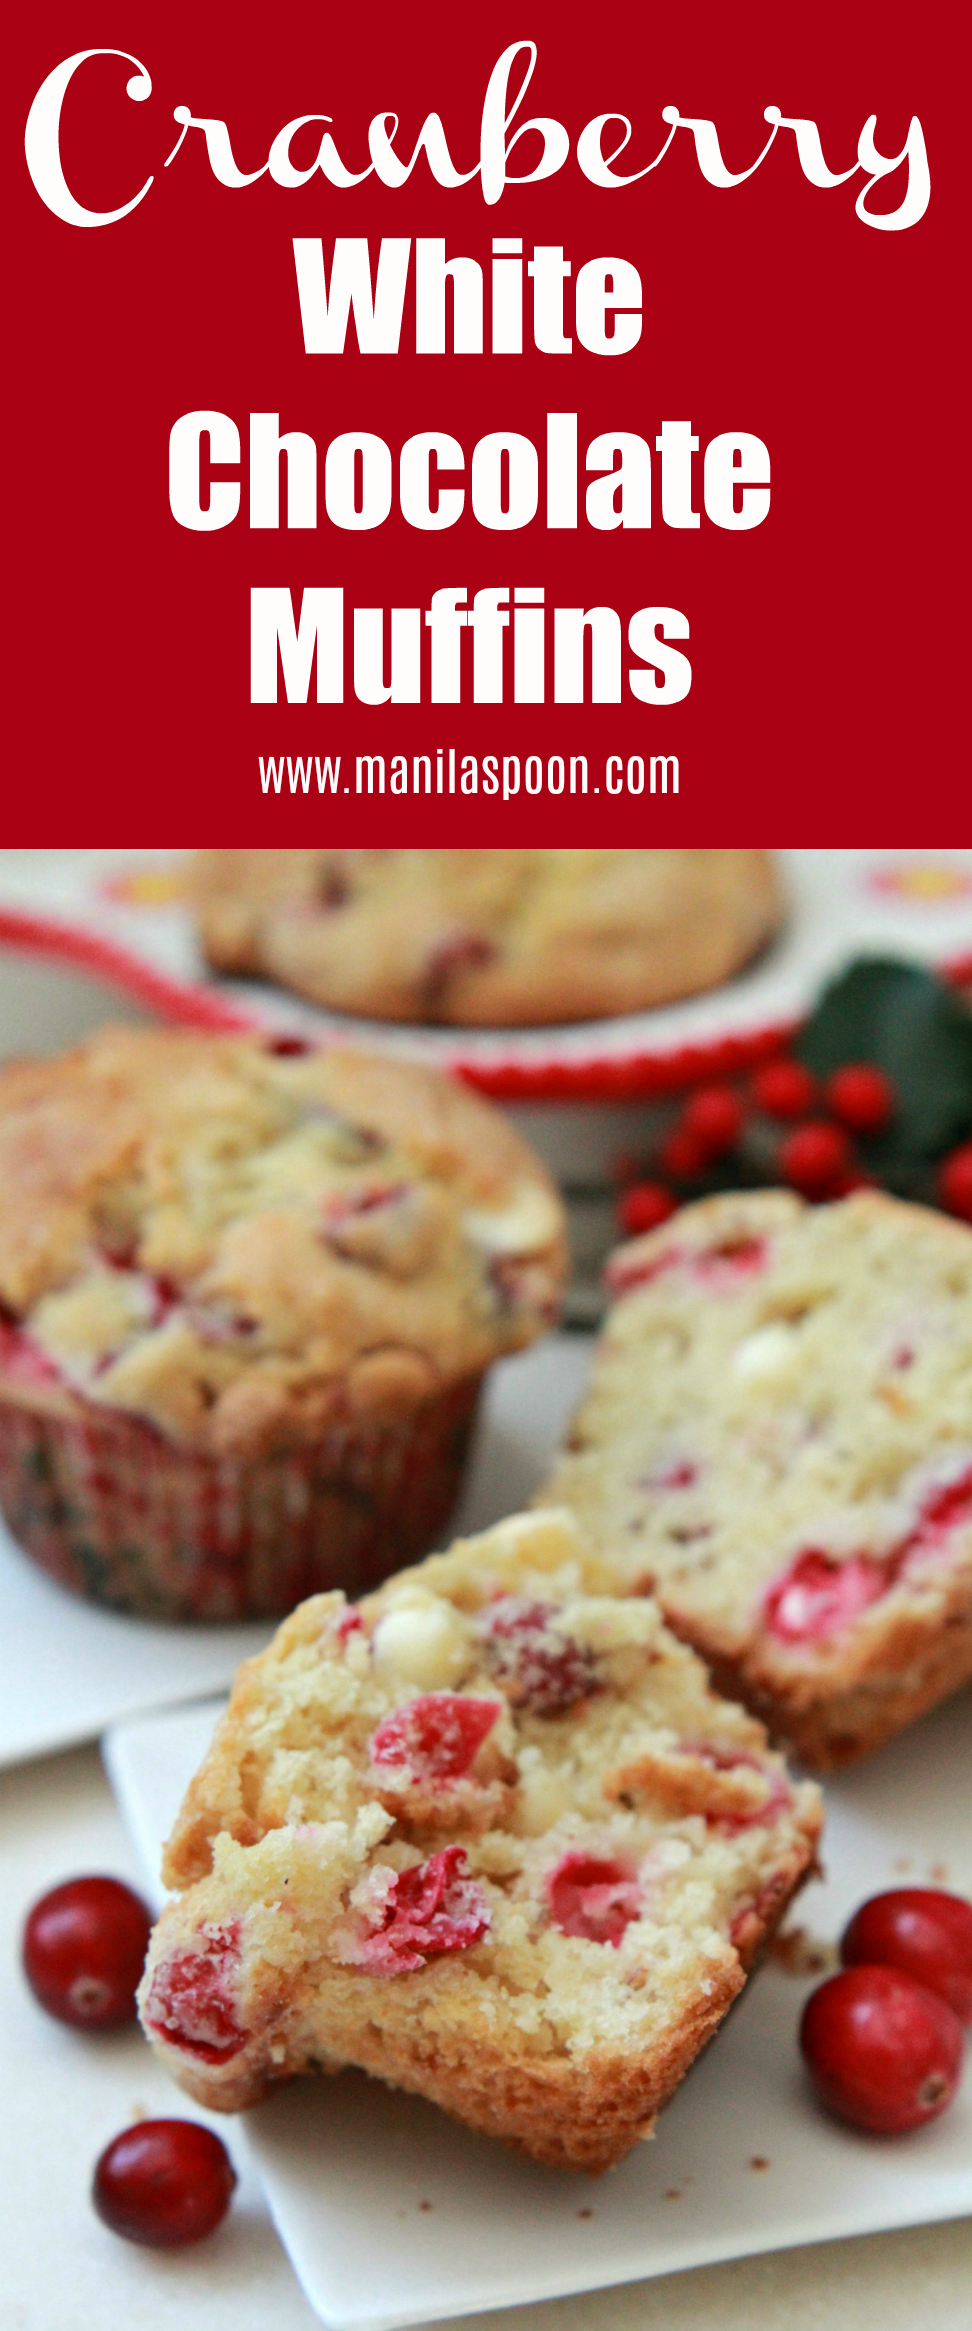 Loaded with white chocolate, dotted with cranberries and deliciously moist and sweet-tangy, these pretty muffins are the perfect holiday treat! #cranberry #whitechocolate #muffins